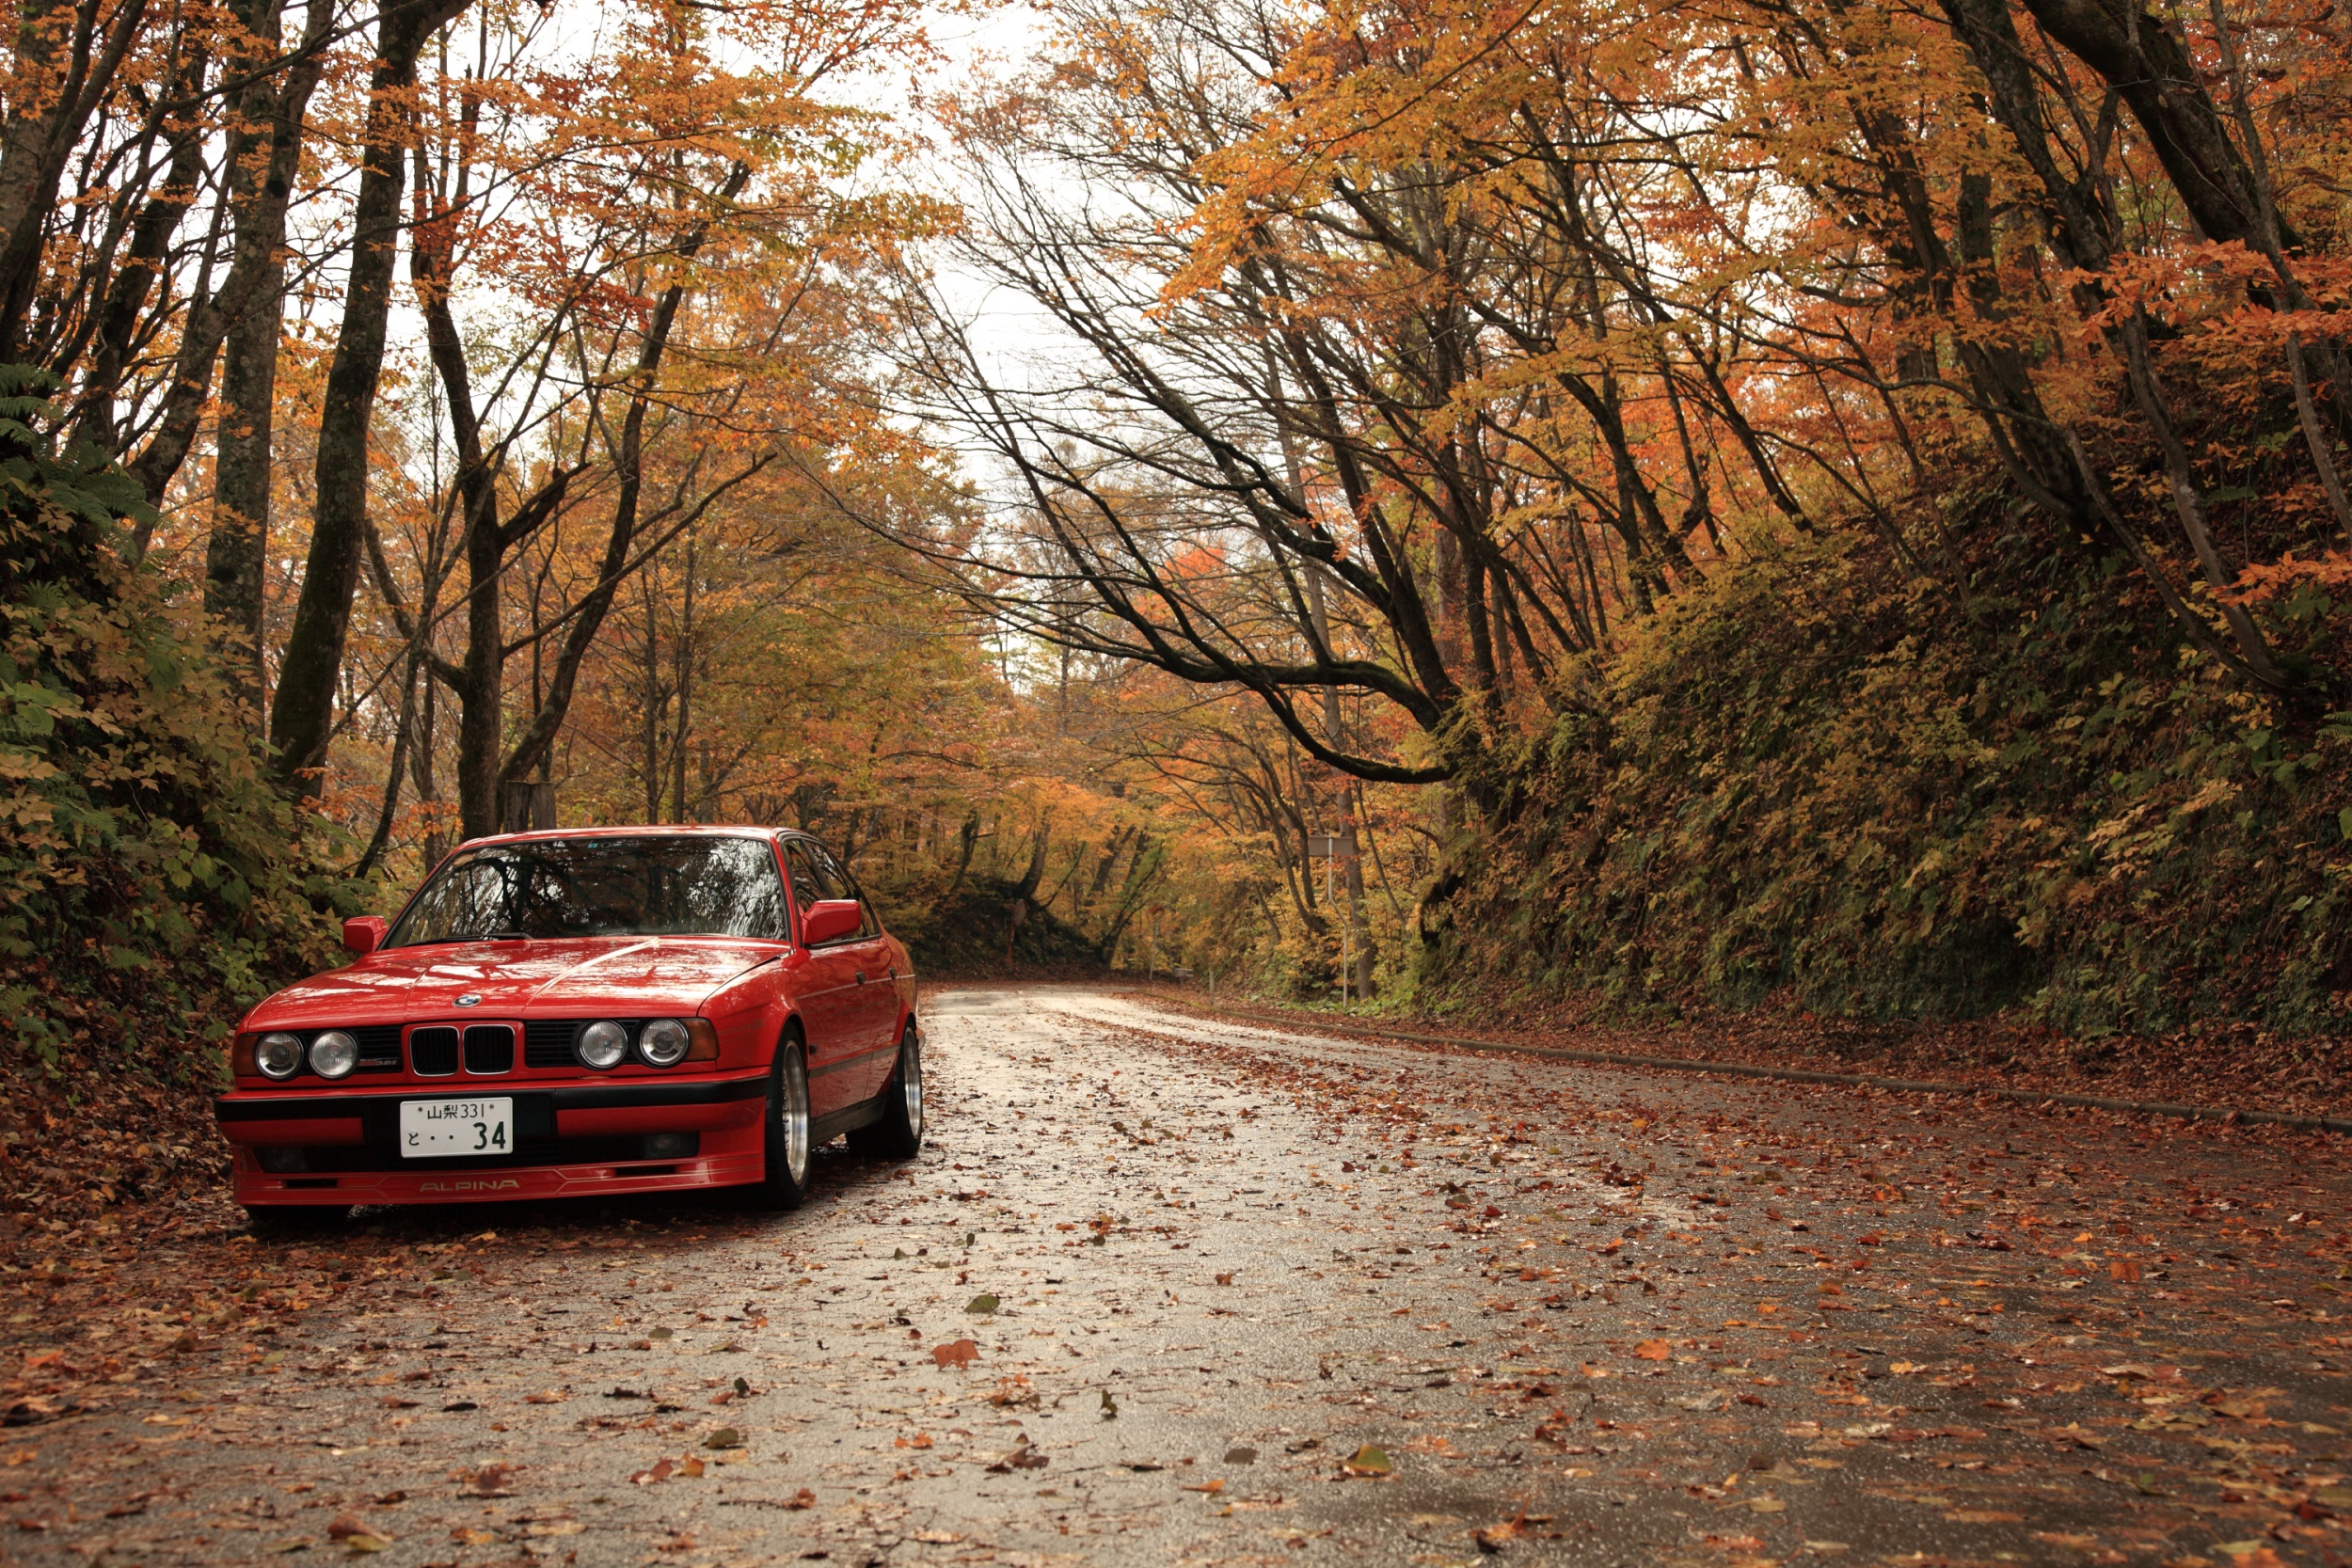 General 2500x1667 BMW fall car road vehicle red cars trees BMW E30